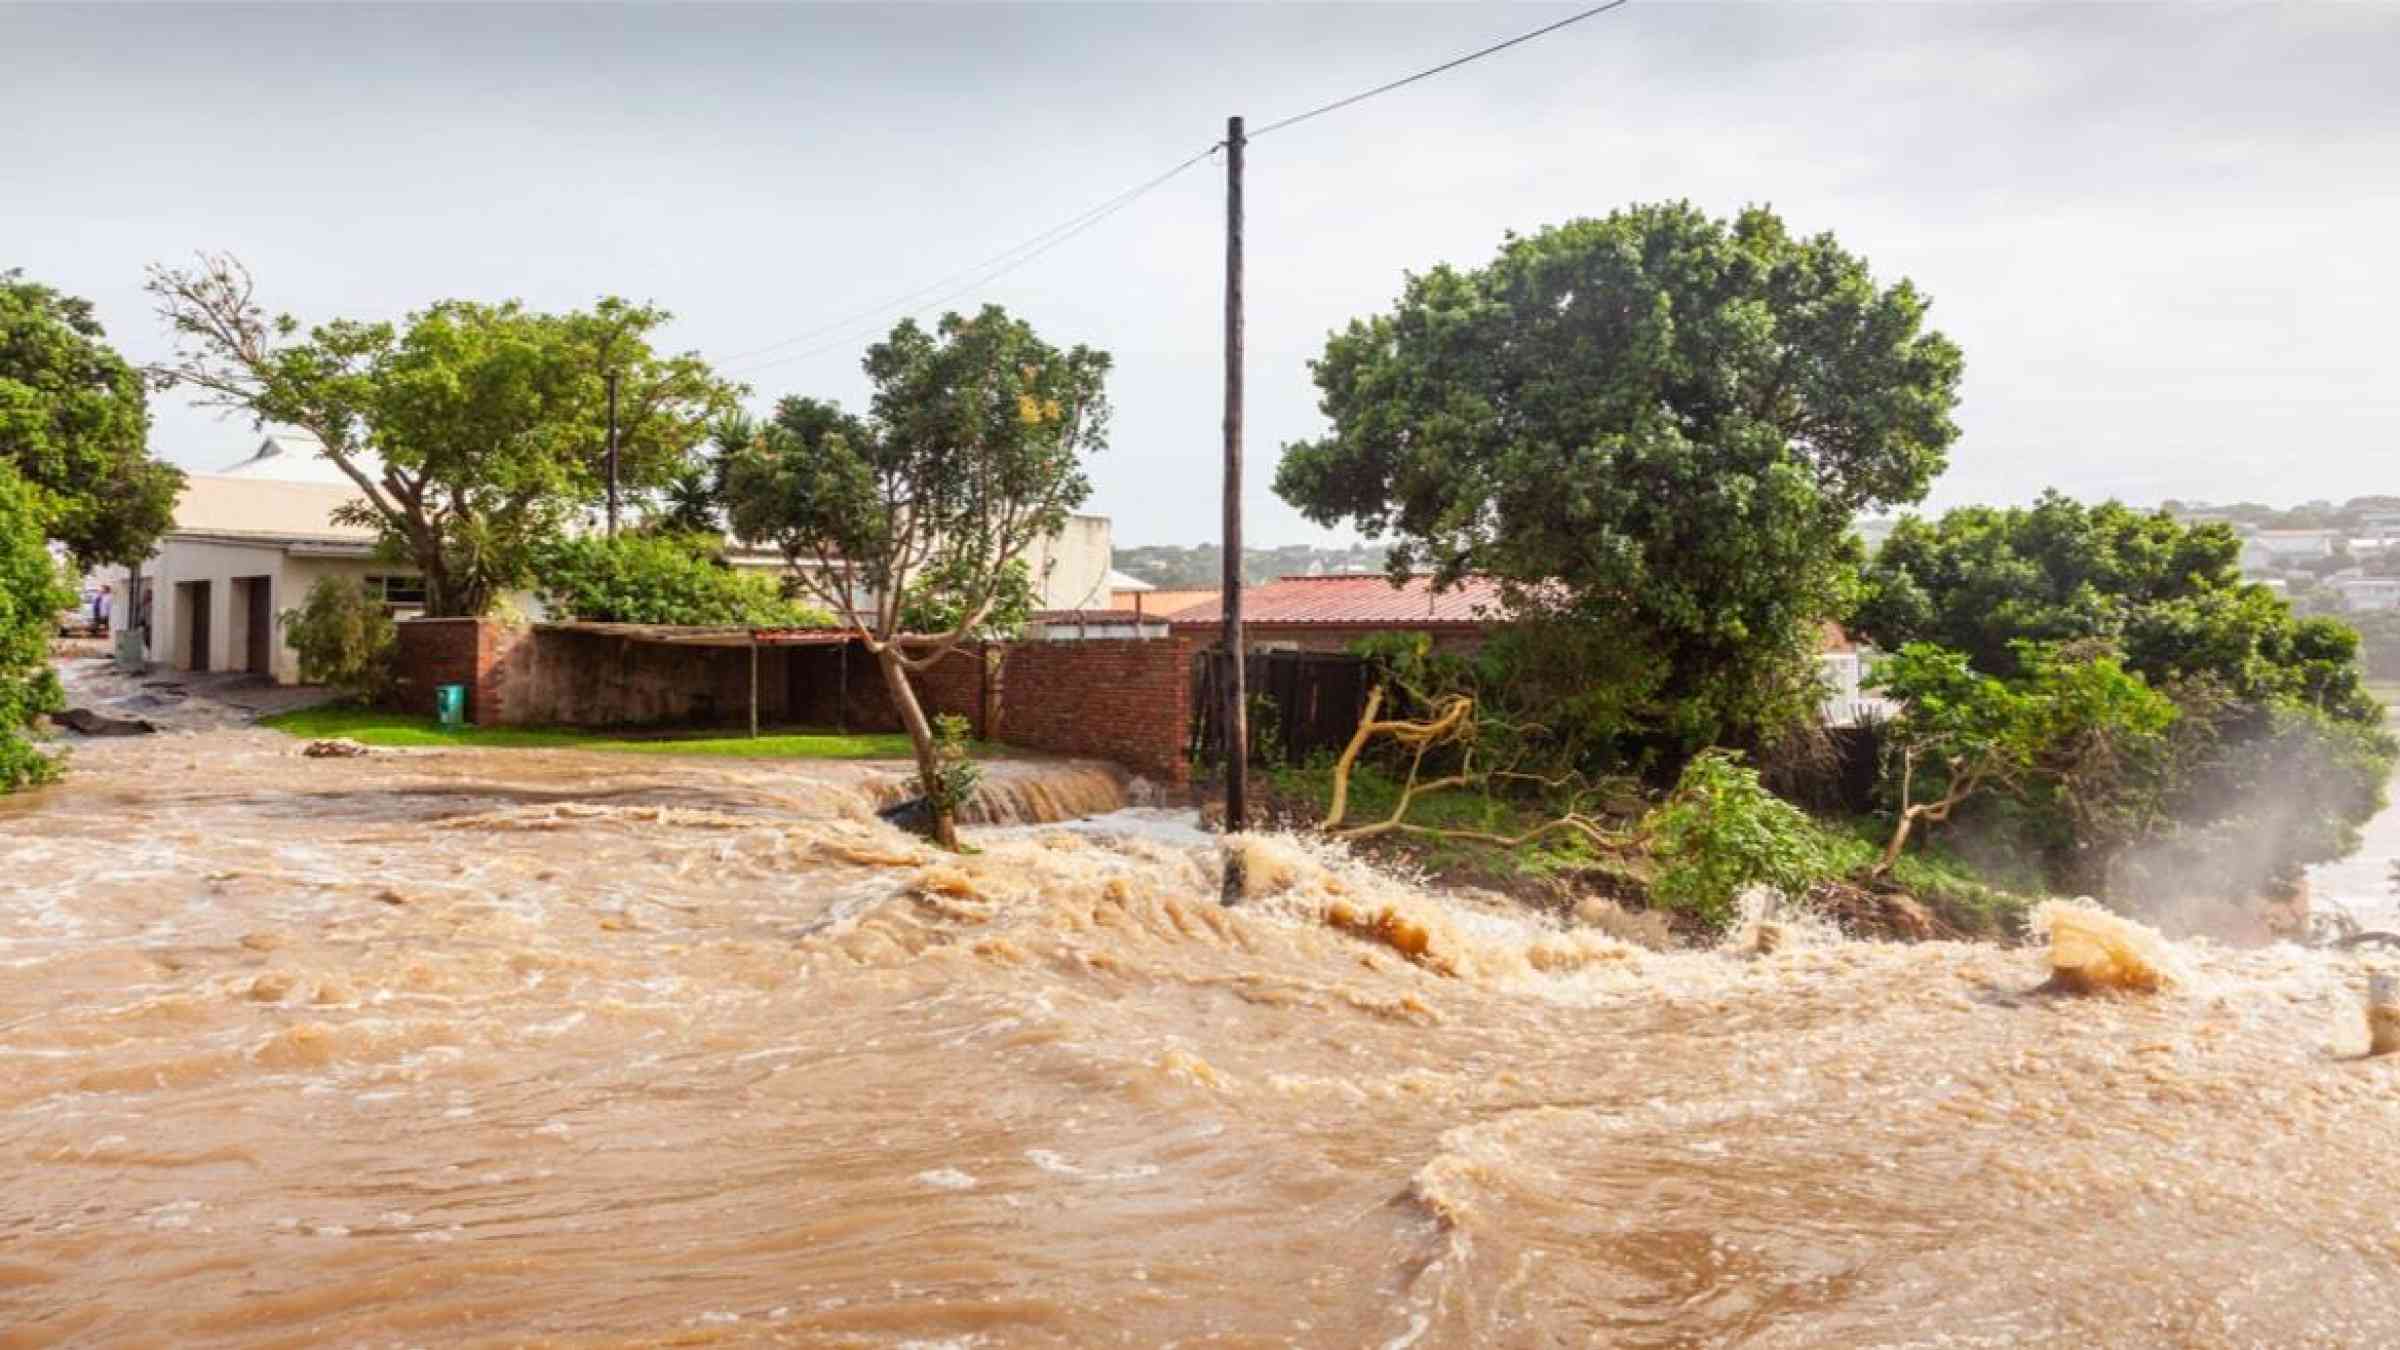 Flooded street and house in Eastern South Africa